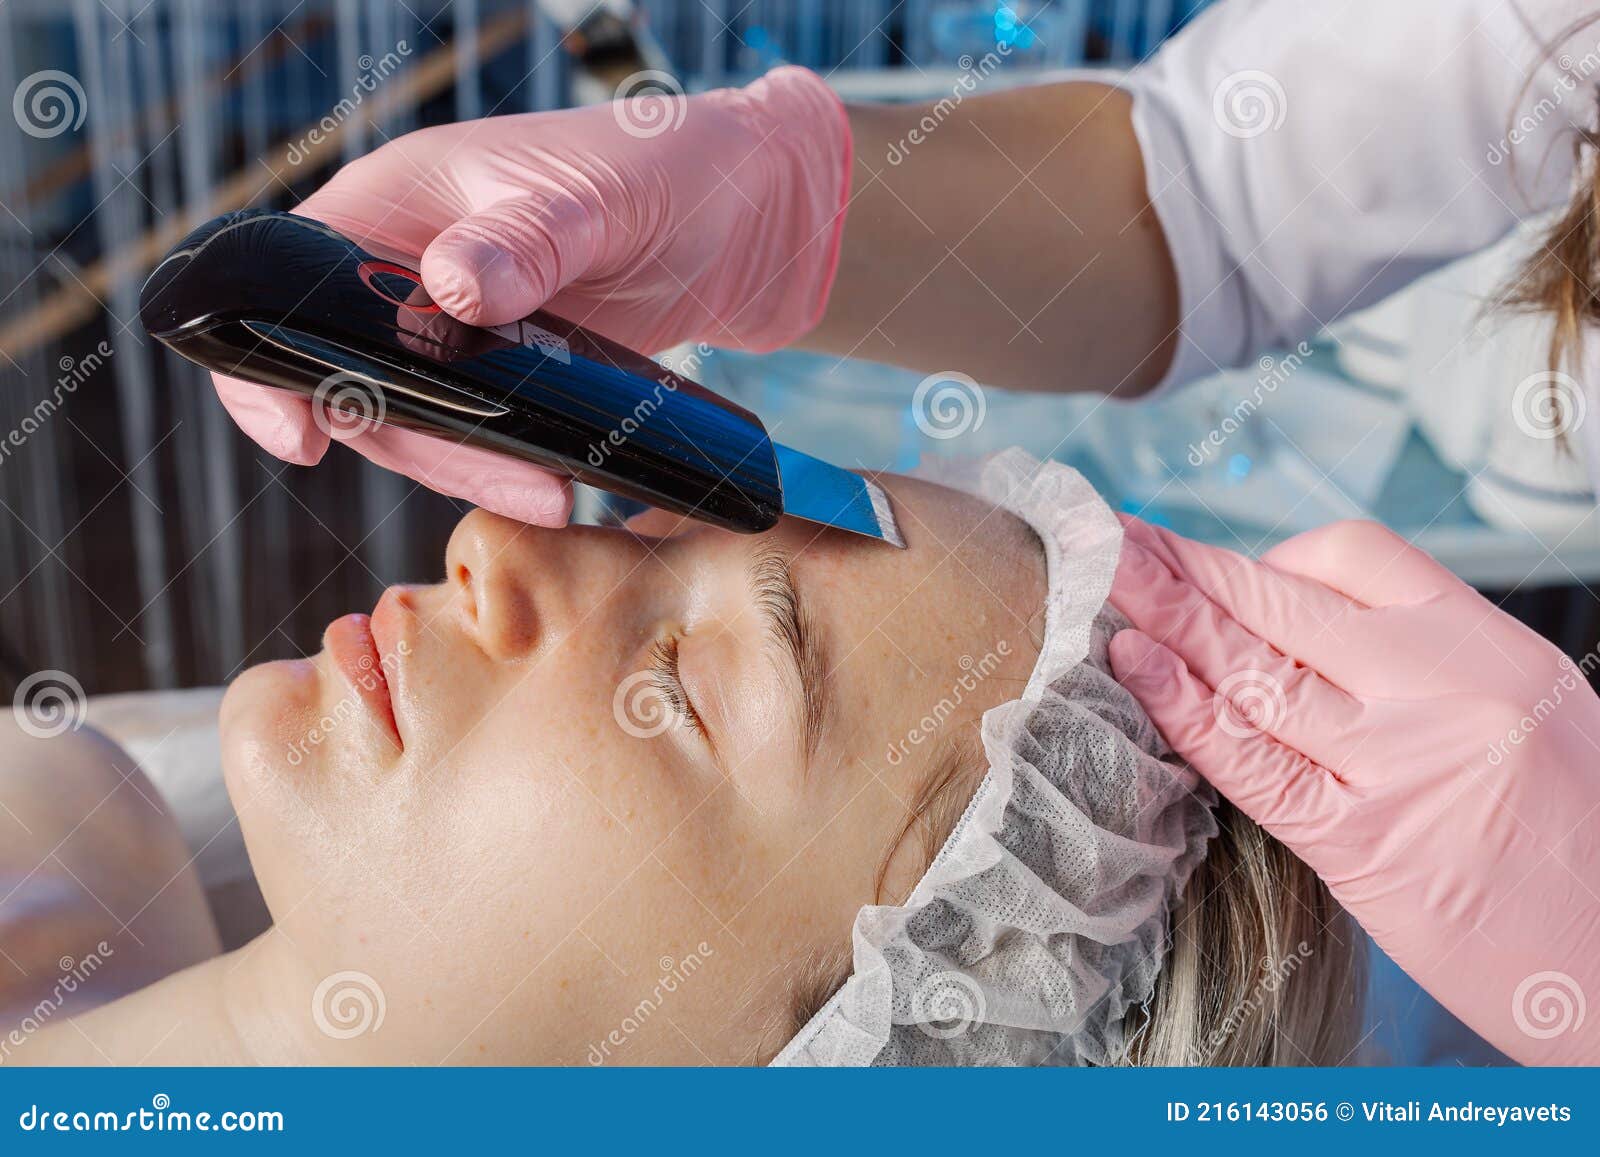 A Professional Cosmetologist Performs An Ultrasonic Face Cleaning